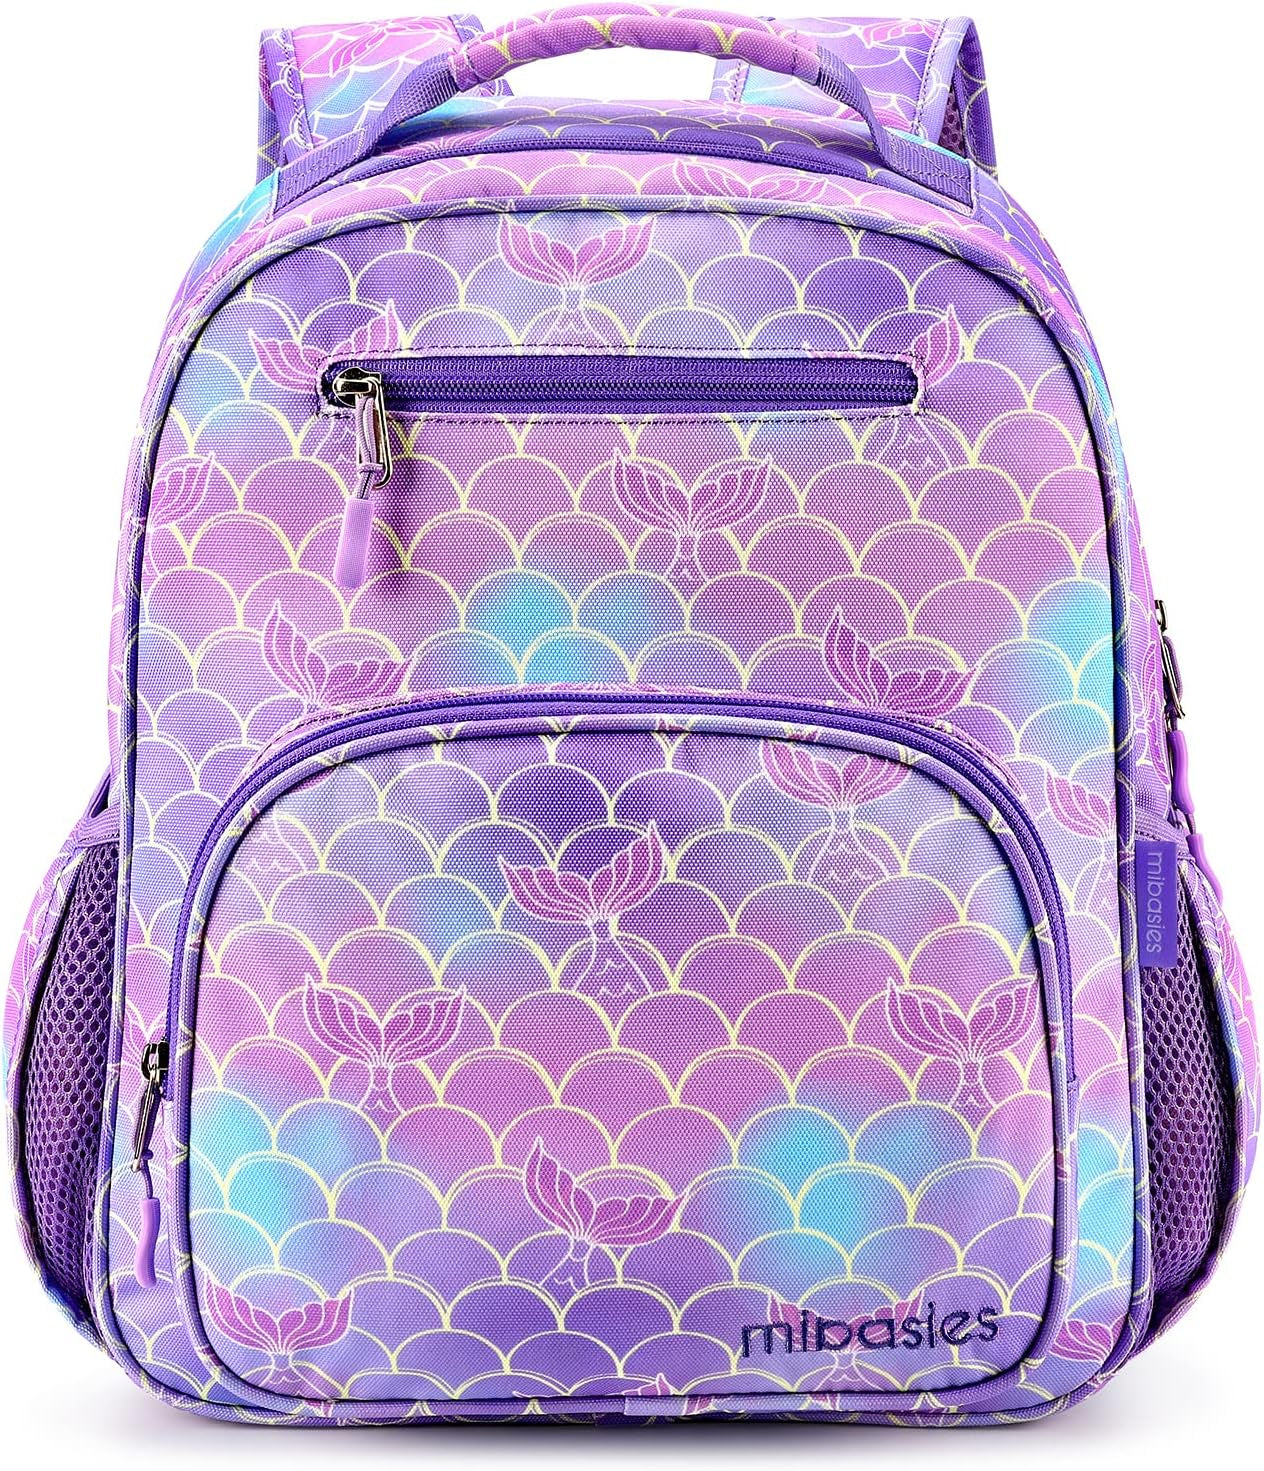 Backpack for Girls, Large Capacity Kids Backpack for Elementary School with Laptop Compartment（Rainbow）